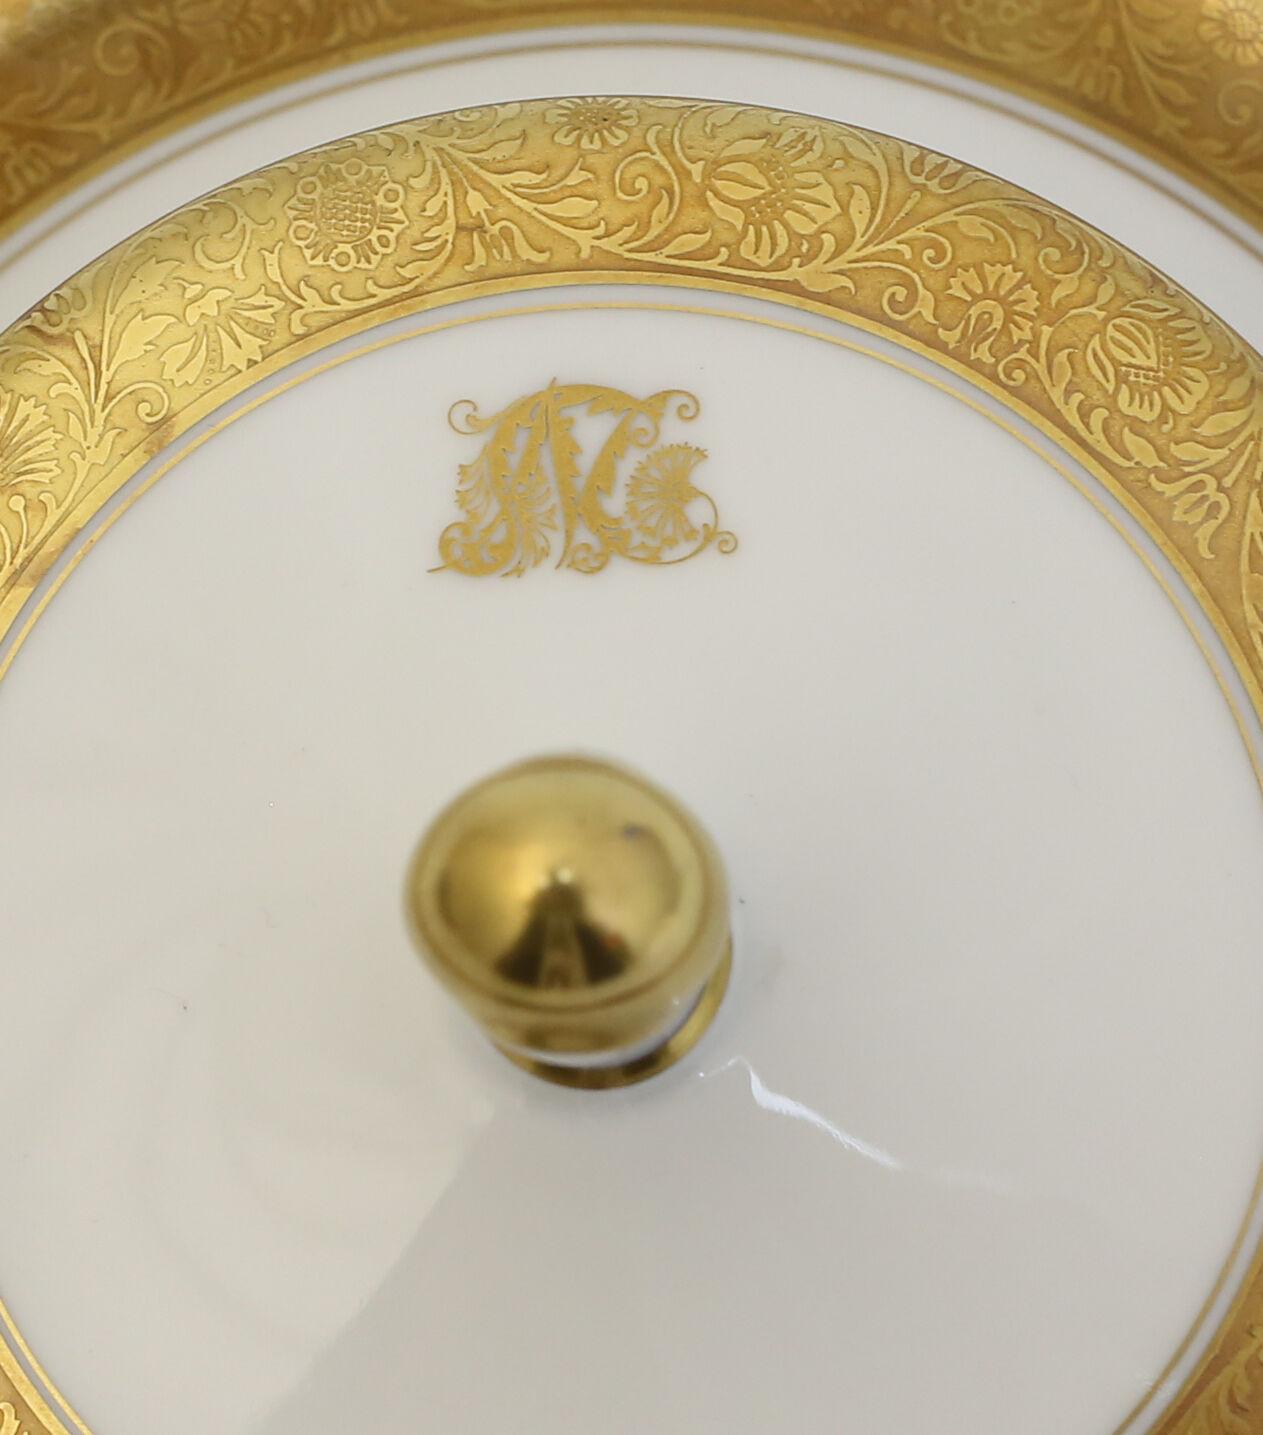 Rosenthal Porcelain Covered Butter Dish Aida Monogramm Saddam Hussein Al Naseri In Good Condition For Sale In Gardena, CA